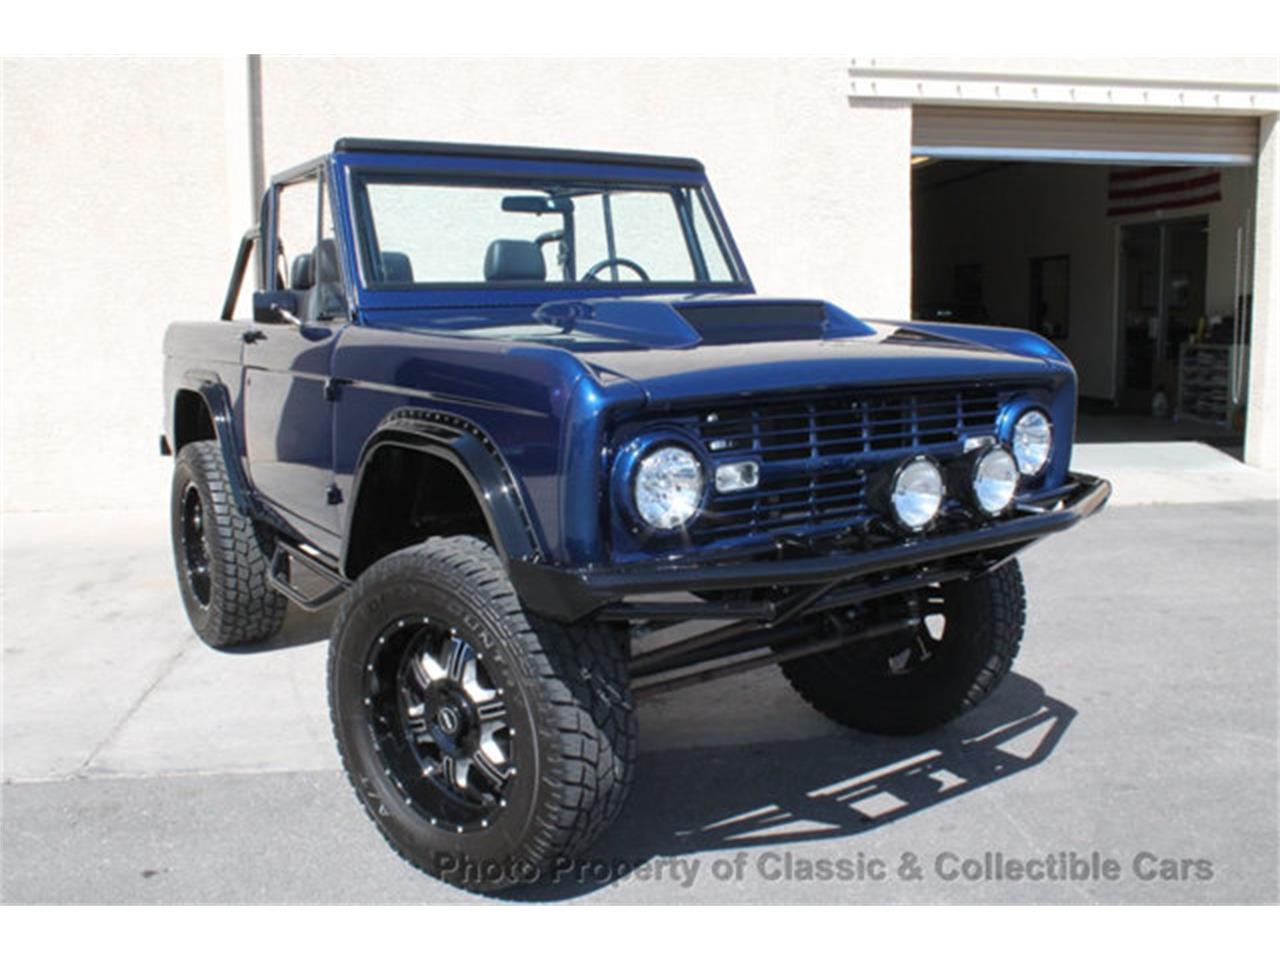 1969 ford bronco for sale classiccars com cc 1090217 1969 ford bronco for sale classiccars